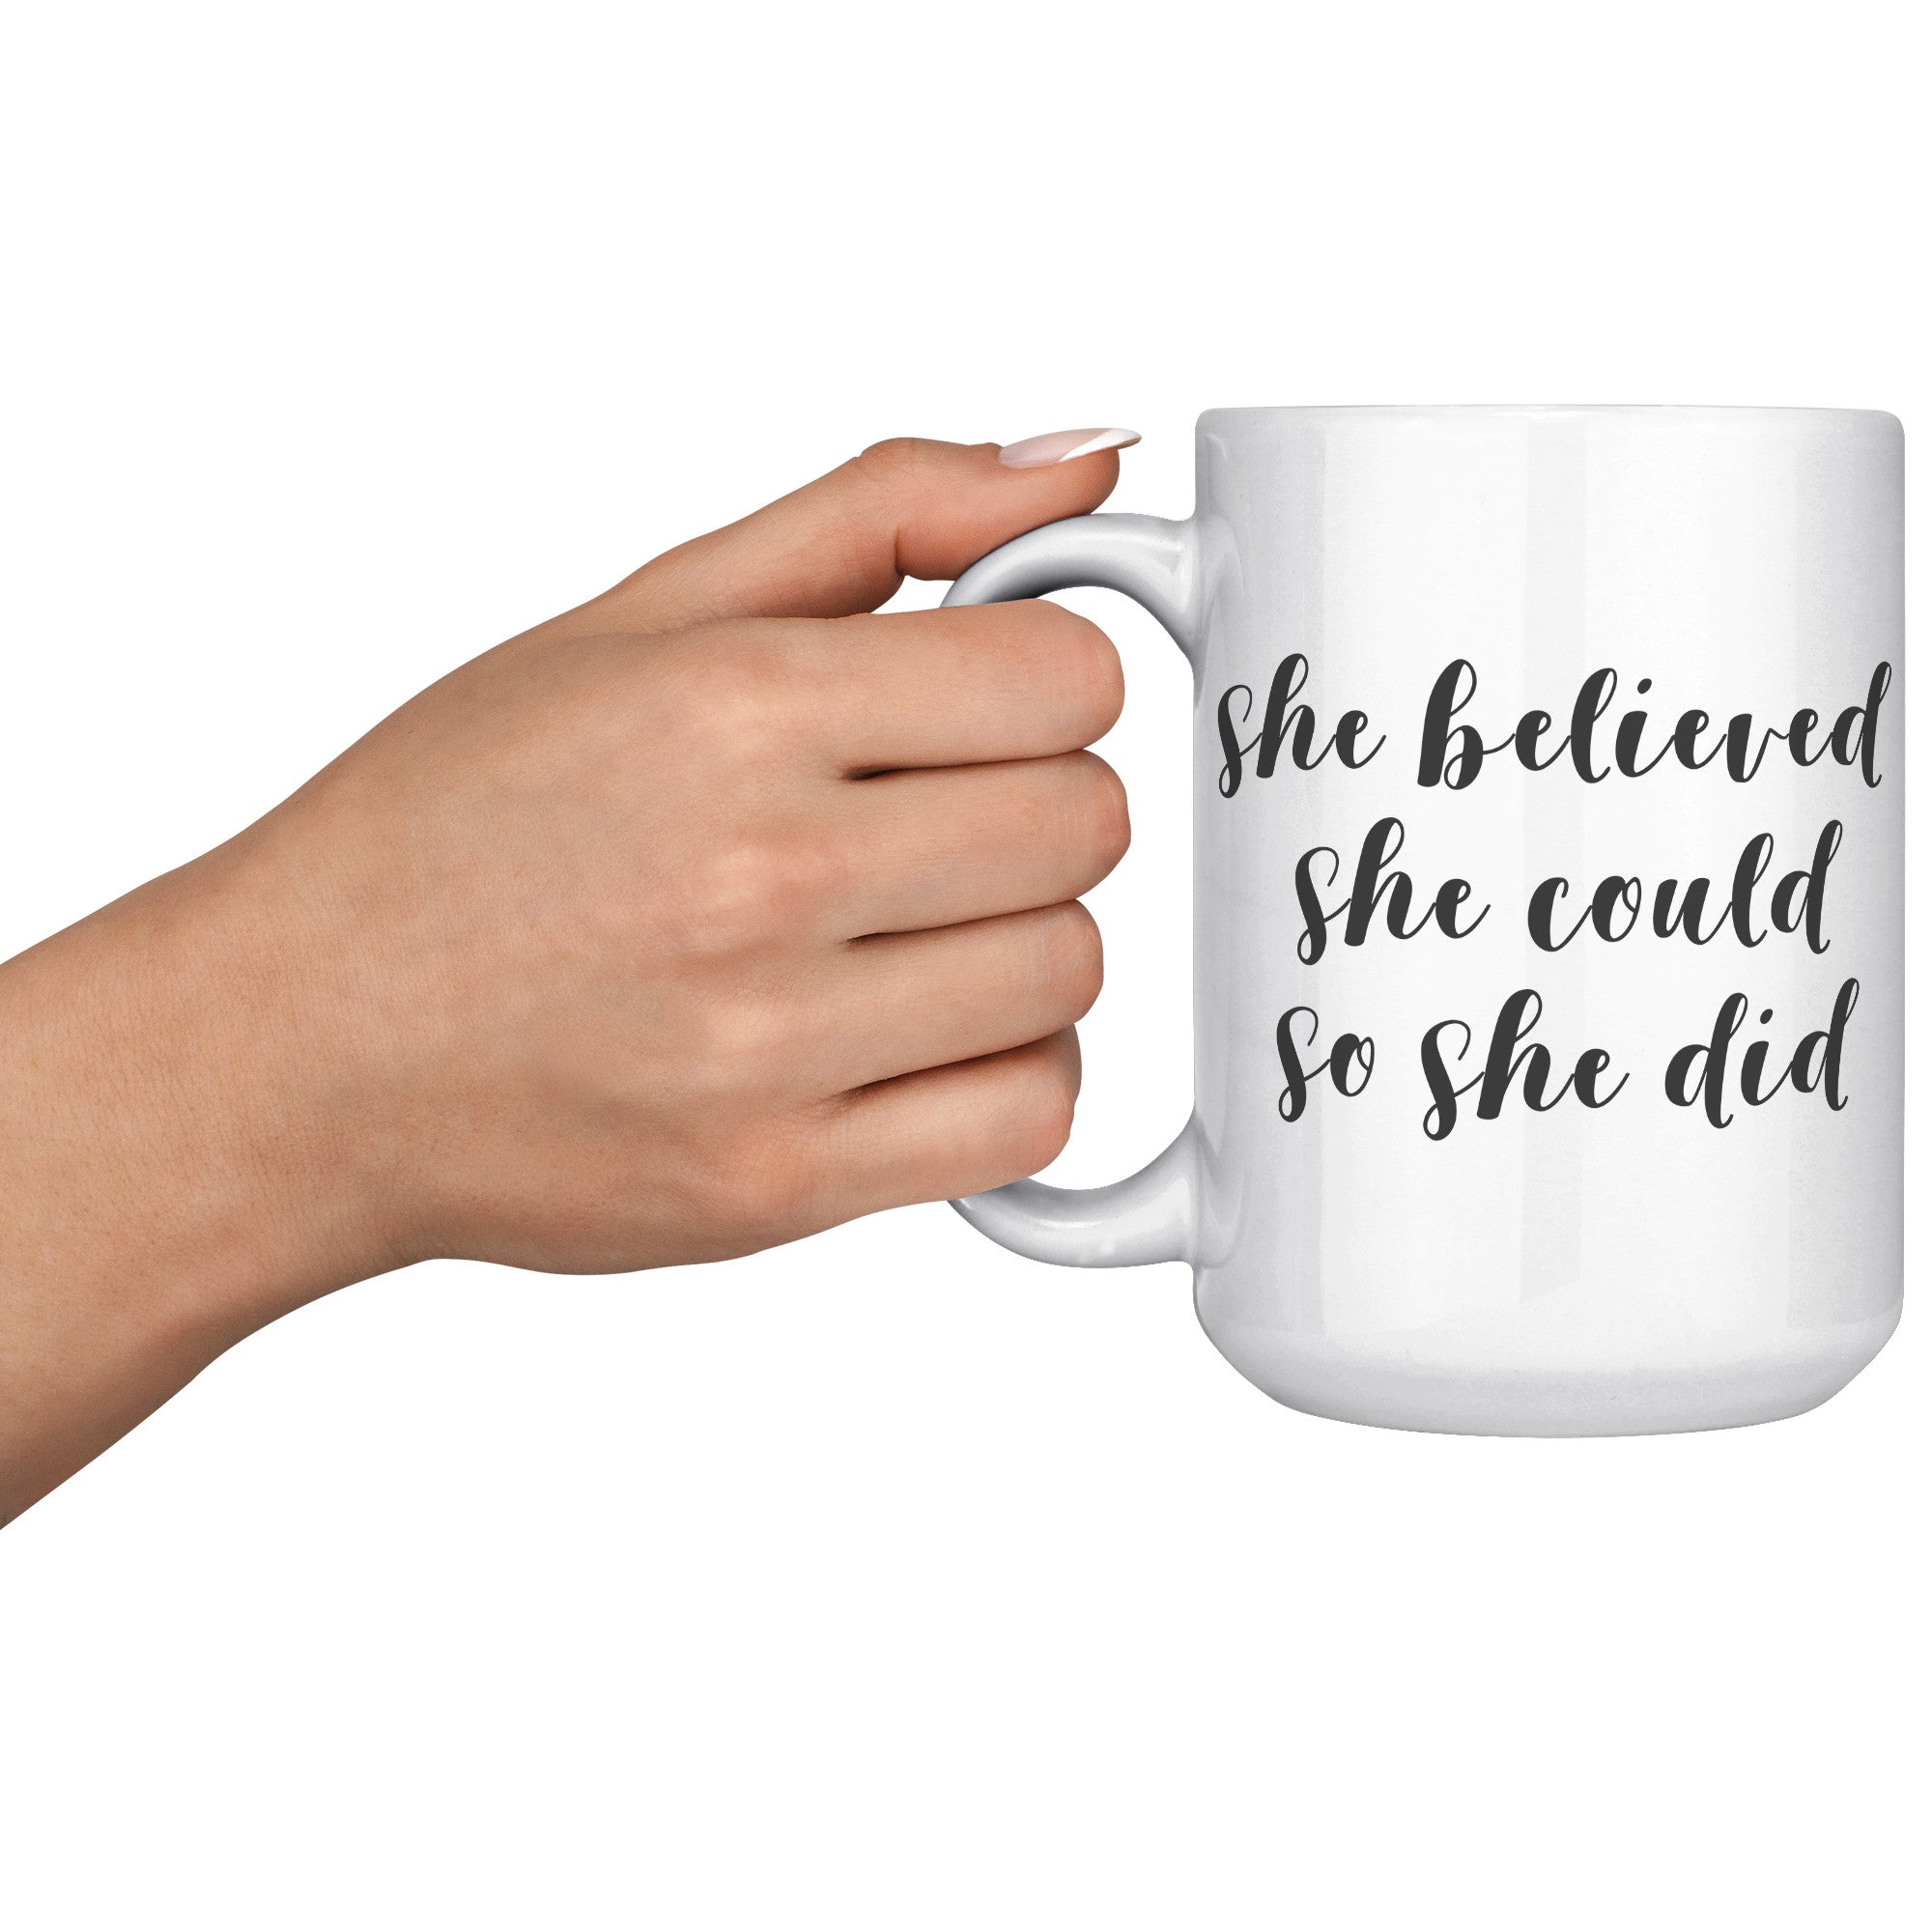 Female Runner Coffee Mug - Inspirational Running Quotes Cup - Perfect Gift for Women Runners - Motivational Marathoner's Morning Brew" - F1